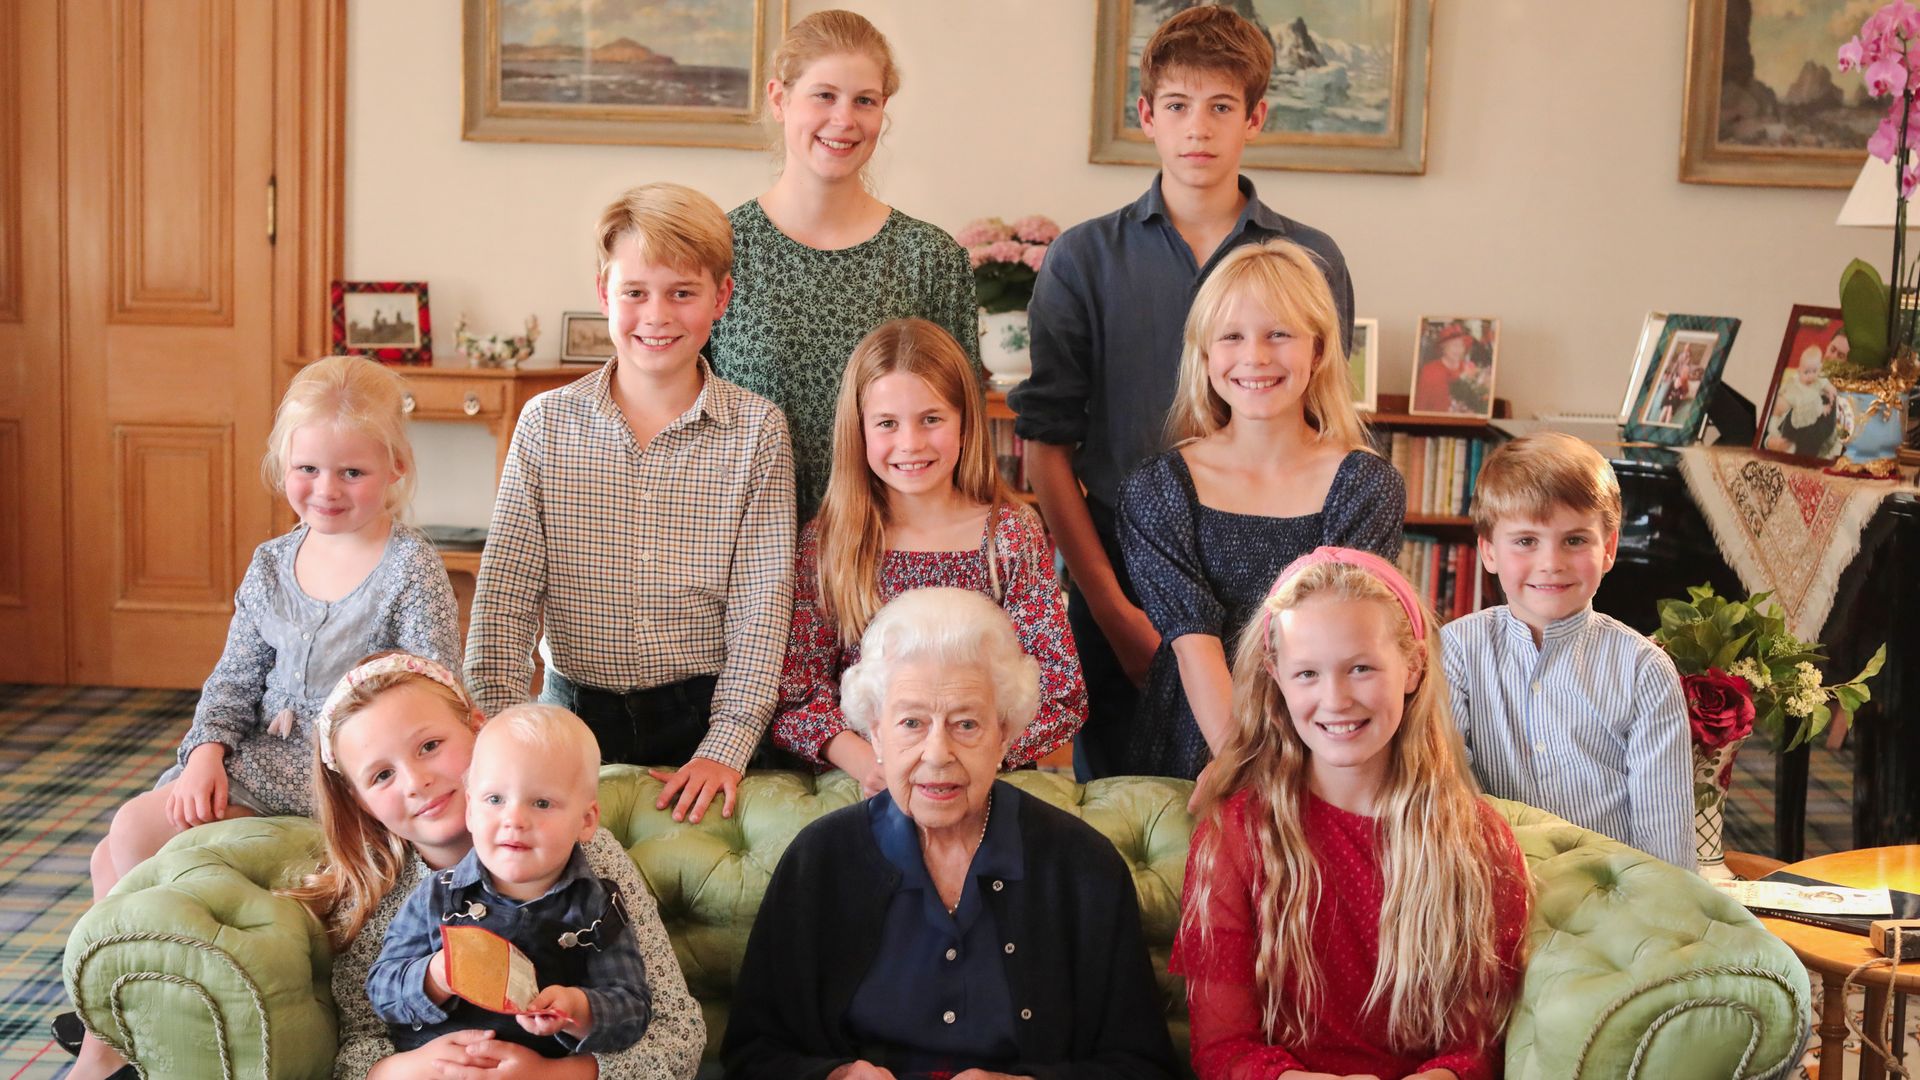 The late Queen pictured with some of her grandchildren and great-grandchildren at Balmoral